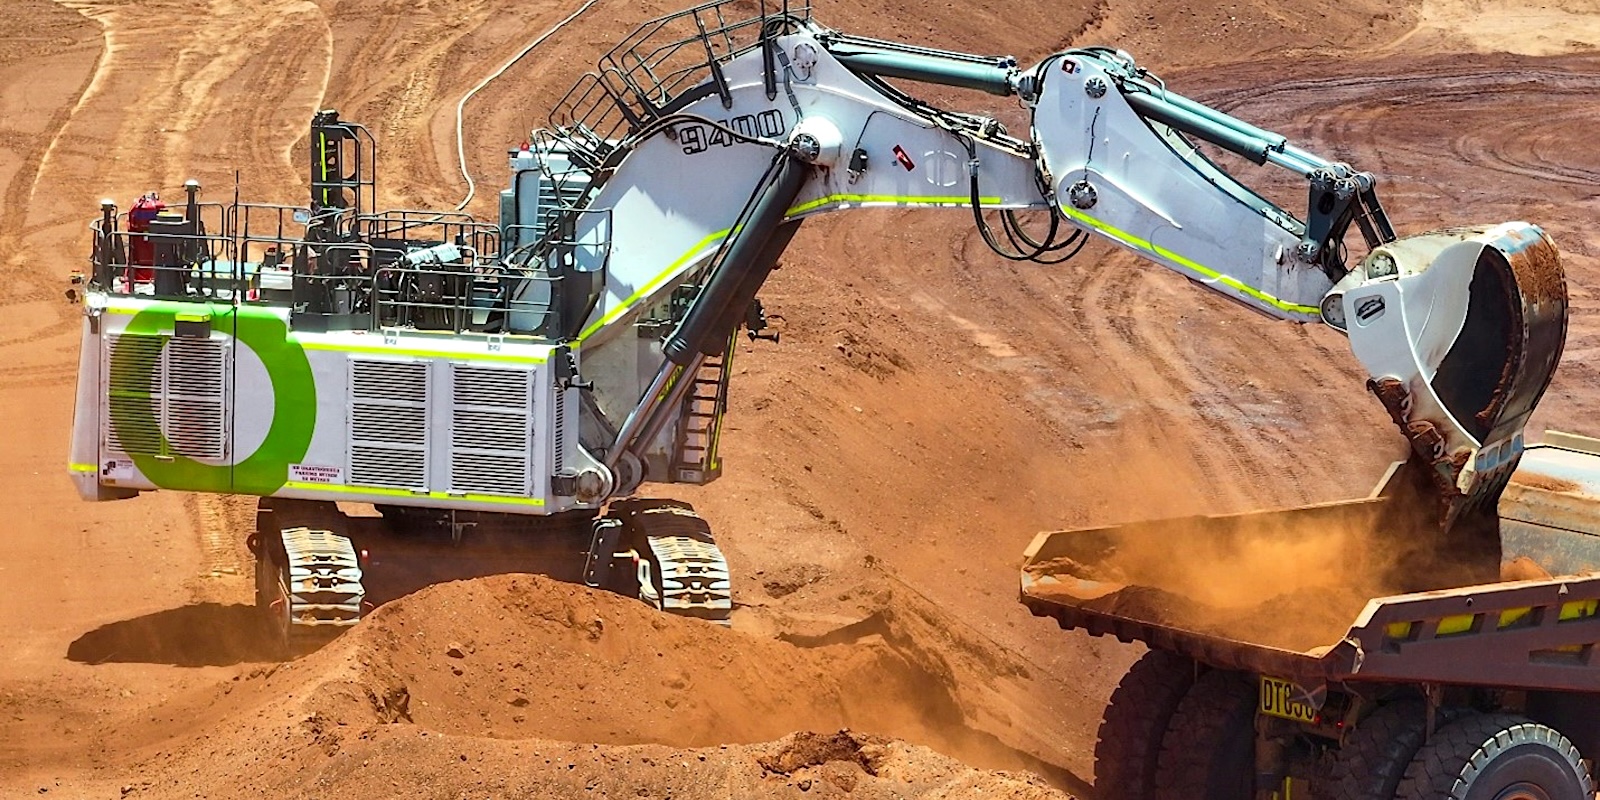 Fortescue’s recently deployed electric excavator has reached the significant milestone of one million tonnes moved since it became operational.